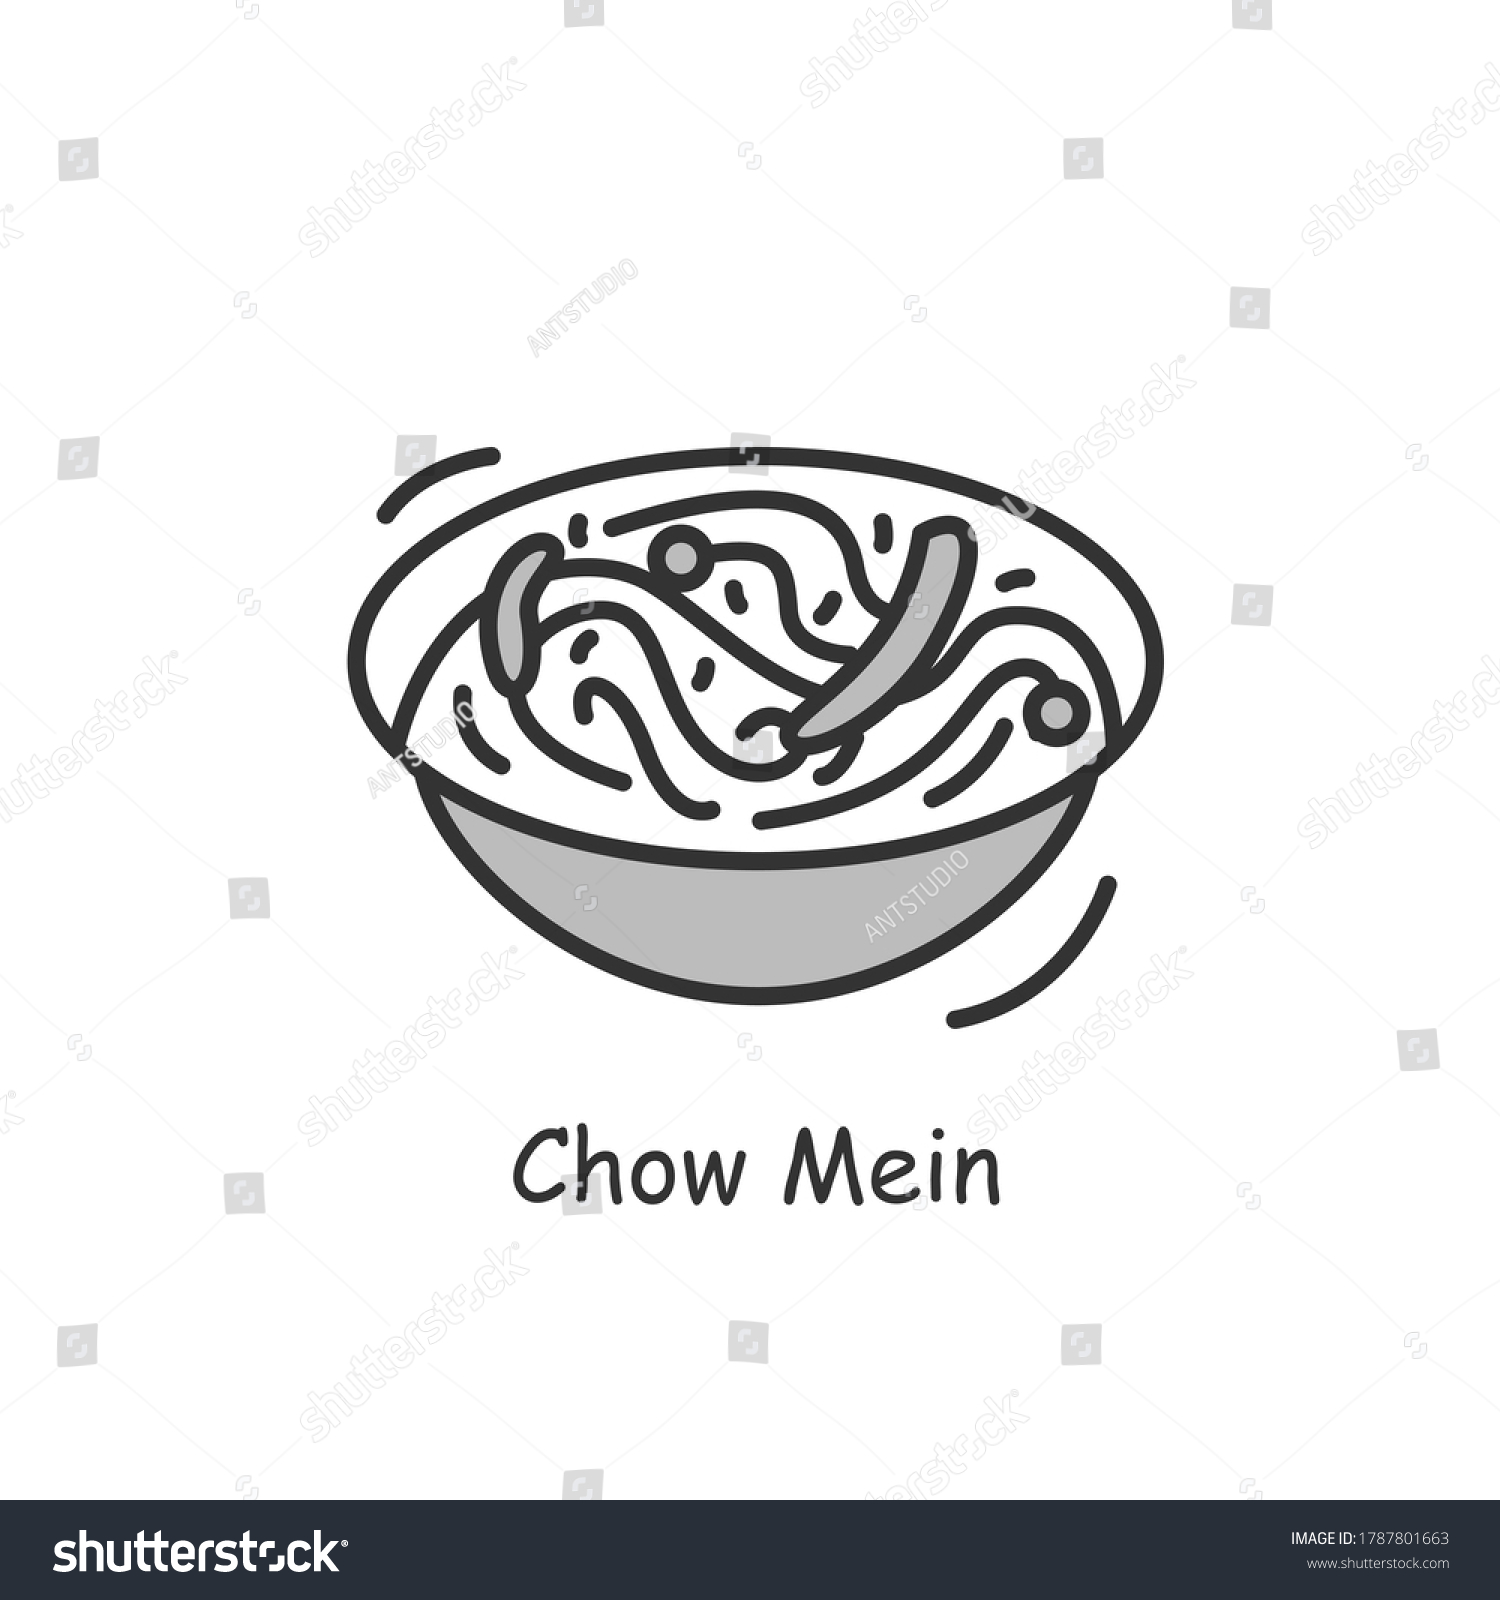 SVG of Chow mein icon. Chinese egg noodles bowl with vegetables or meat linear pictogram. Concept of tasty and easy wok or pan fried Asian food recipe for family dinner. Editable stroke vector illustration svg